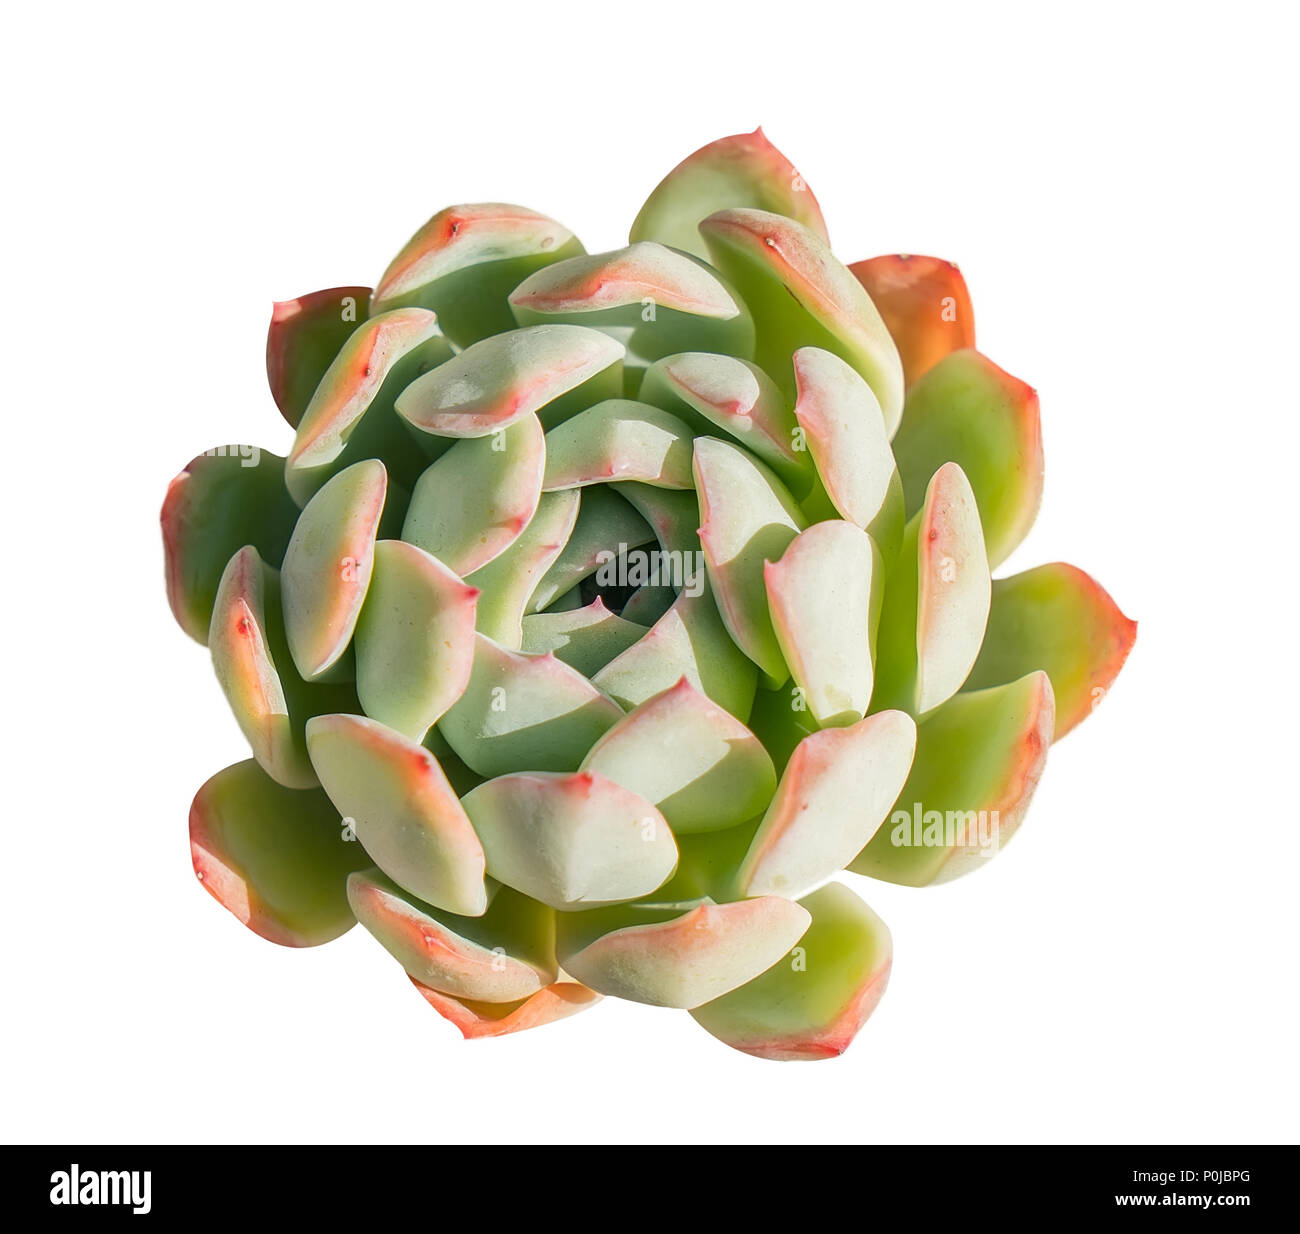 Cactus succulent plant isolated on white Banque D'Images